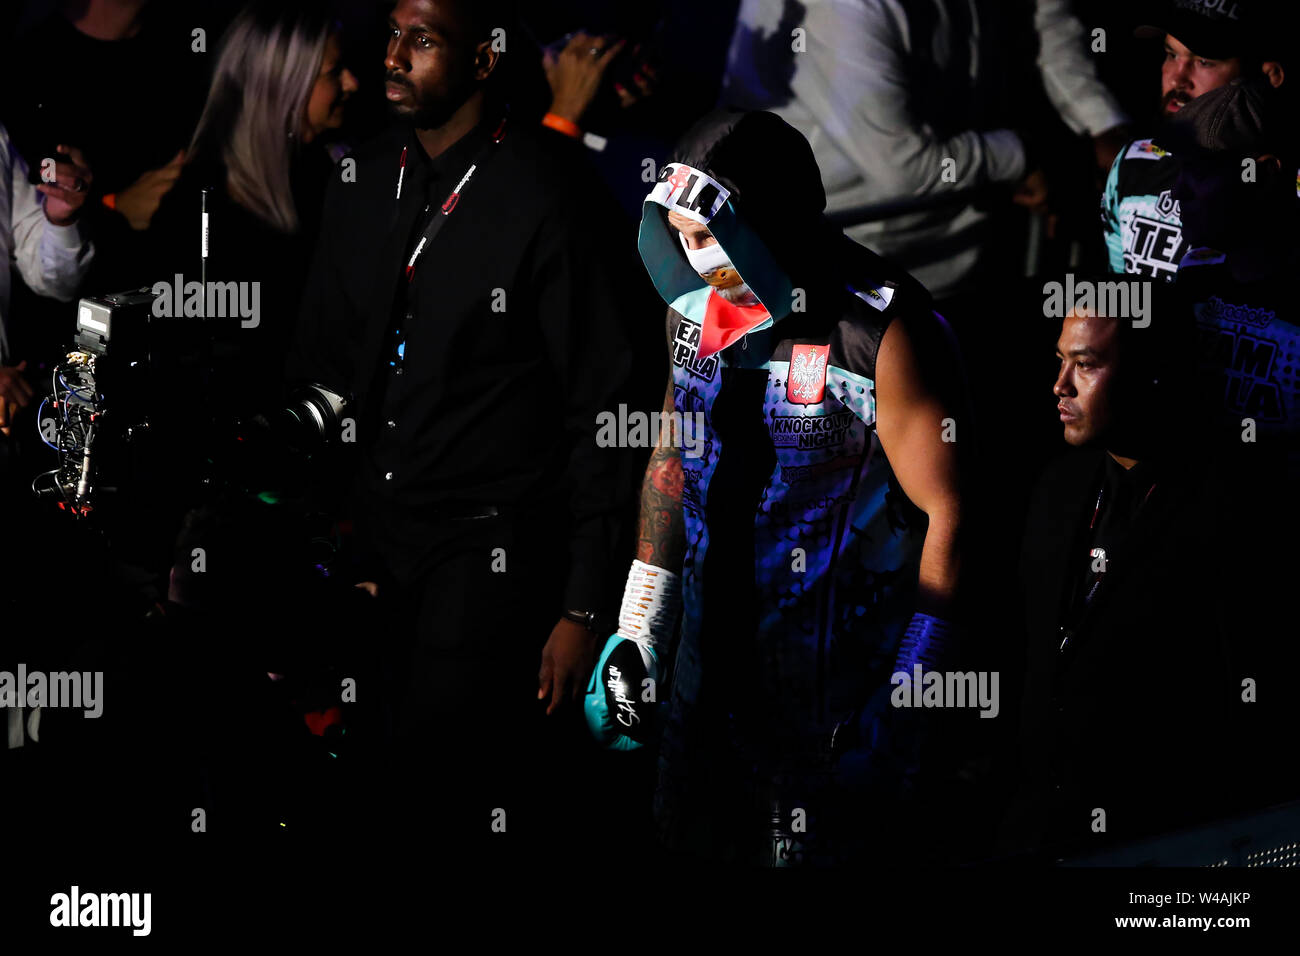 LONDON, ENGLAND - JULY 20: Artur Szpilka walks to the ring ahead of his fight with Dereck Chisora during the Heavyweight contest during the Matchroom Stock Photo